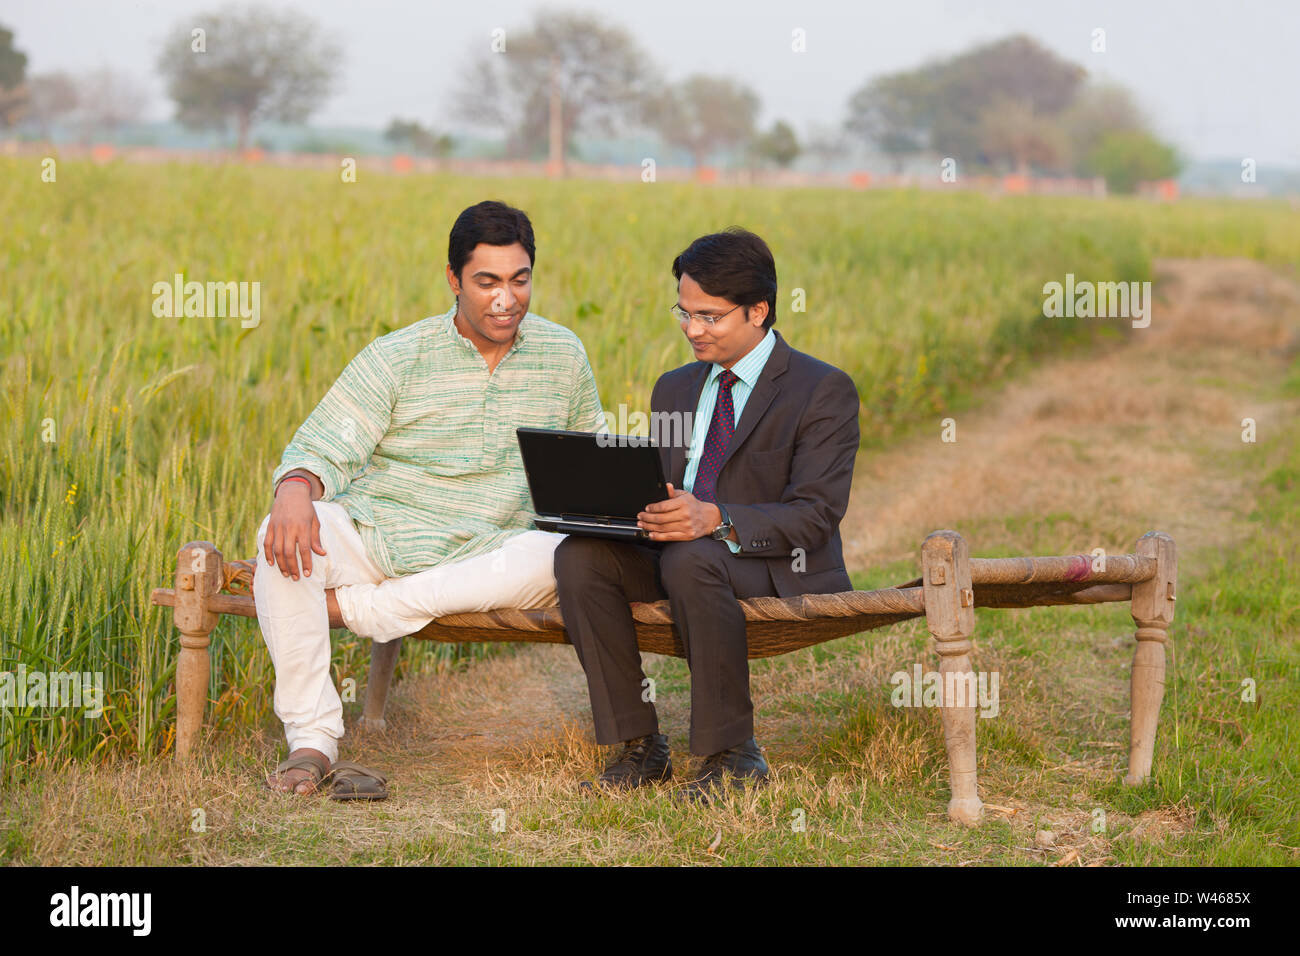 Advisor working on a laptop with a farmer Stock Photo